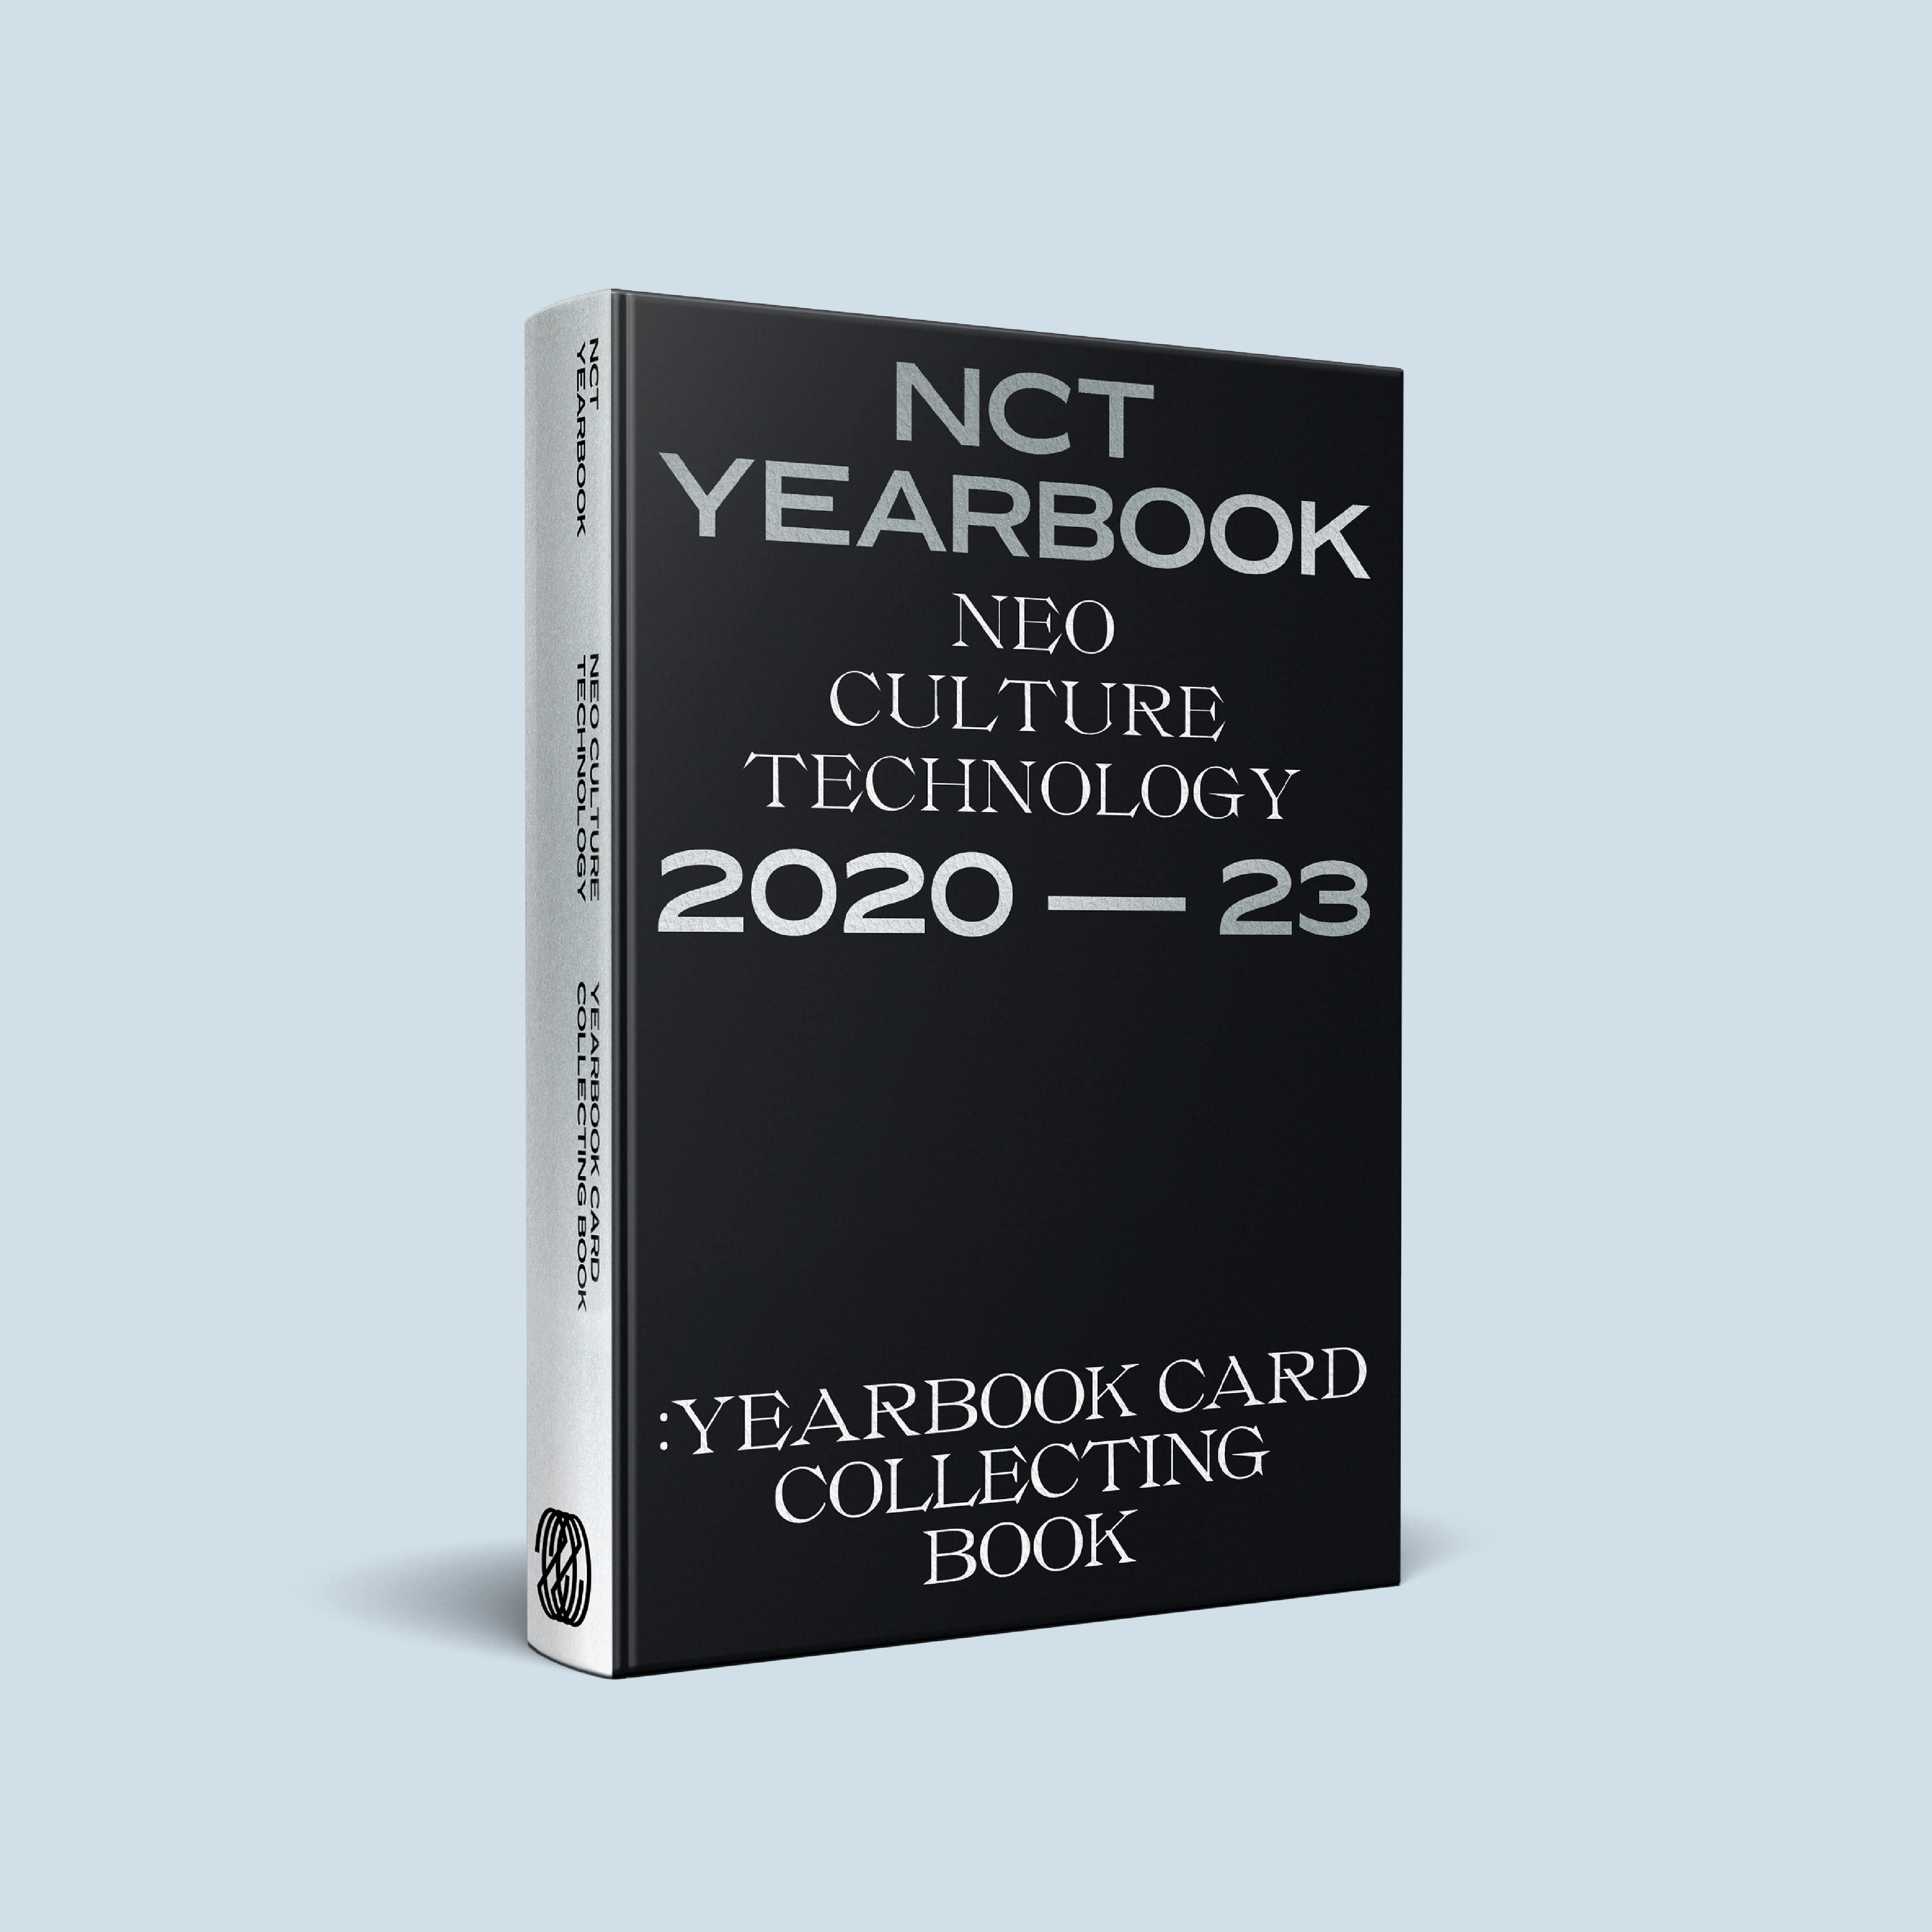 NCT YEARBOOK - Card Collecting Book케이팝스토어(kpop store)